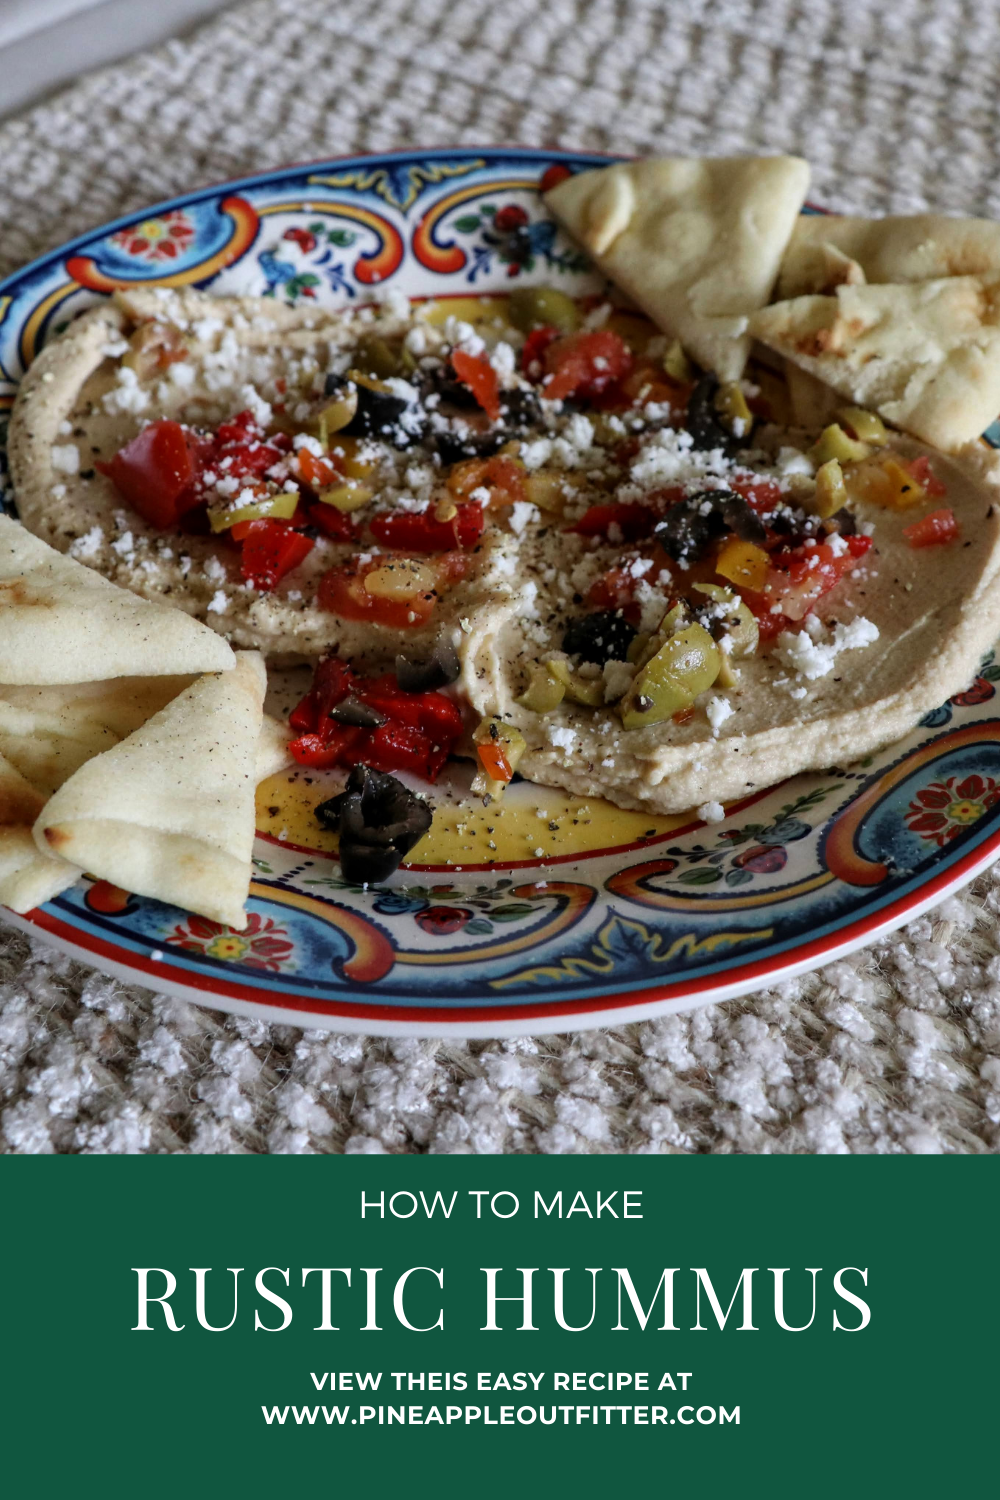 how to make rustic hummus - Cover